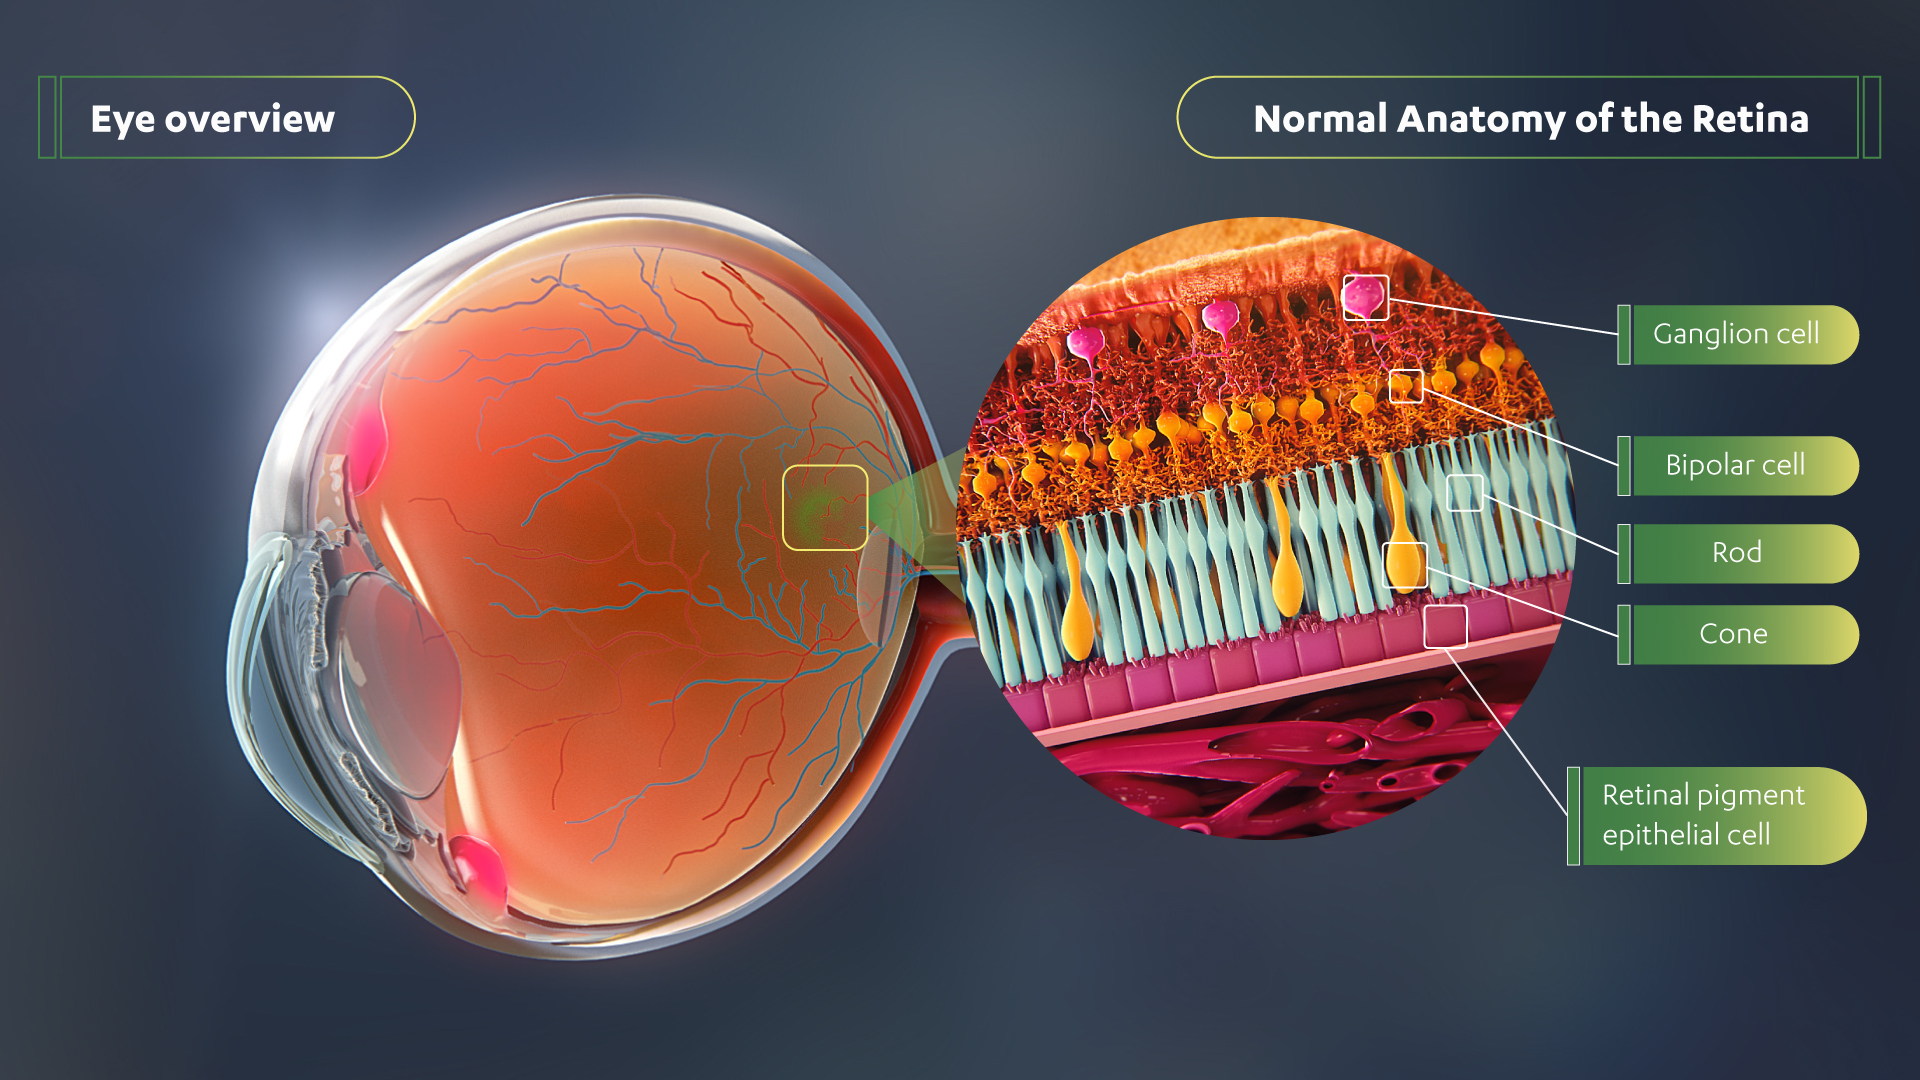 Eye Overview. Normal Anatomy of the Retina. A multicolored diagram showing the inside of the Retina in orange and a close up of the Ganglion cells (pink), Bipolar cells (orange), Rods (blue), Cones (yellow) and Retinal pigment epithelial cell (maroon).